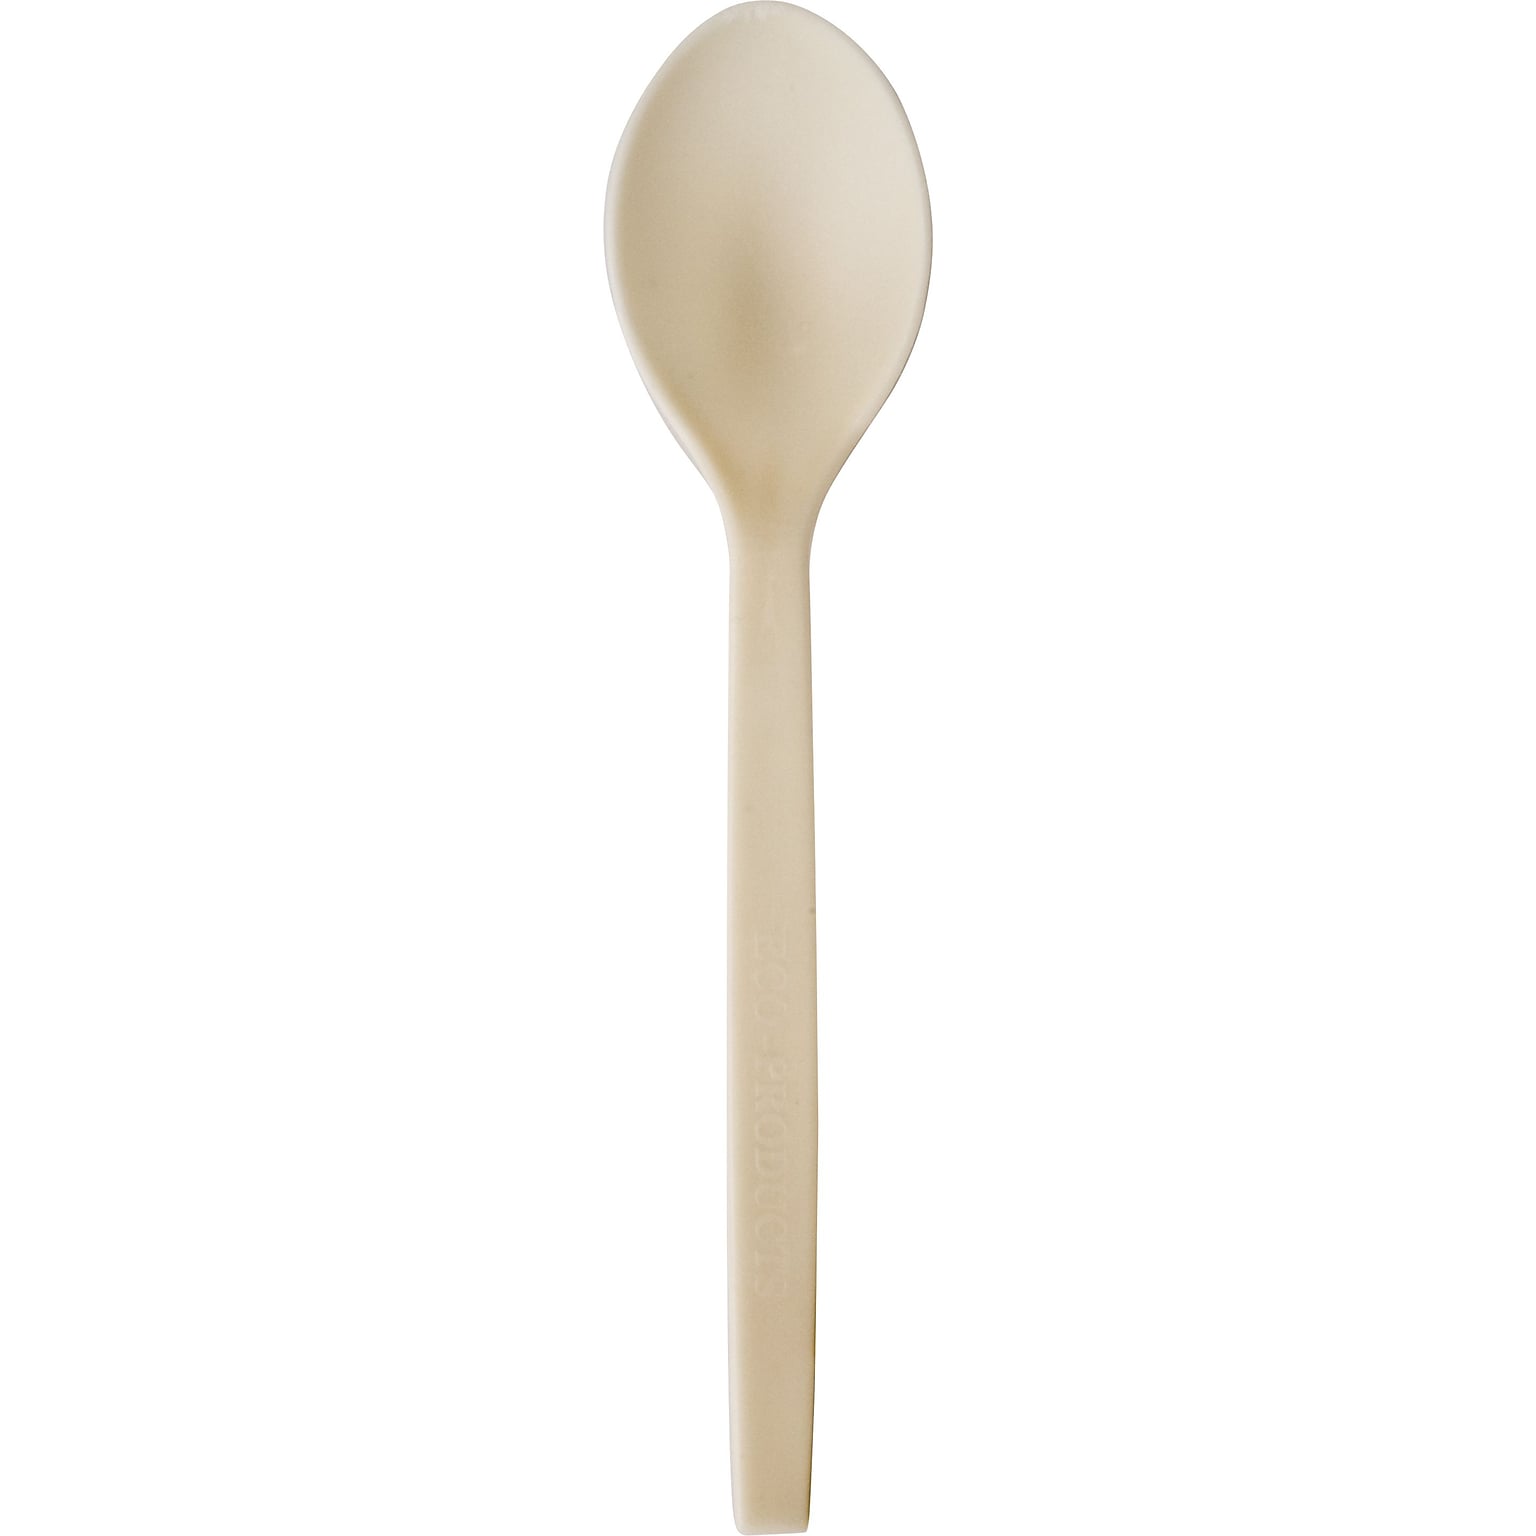 Eco-Products PSM Plant Starch Spoon, Beige, 50/Pack (EP-S003)